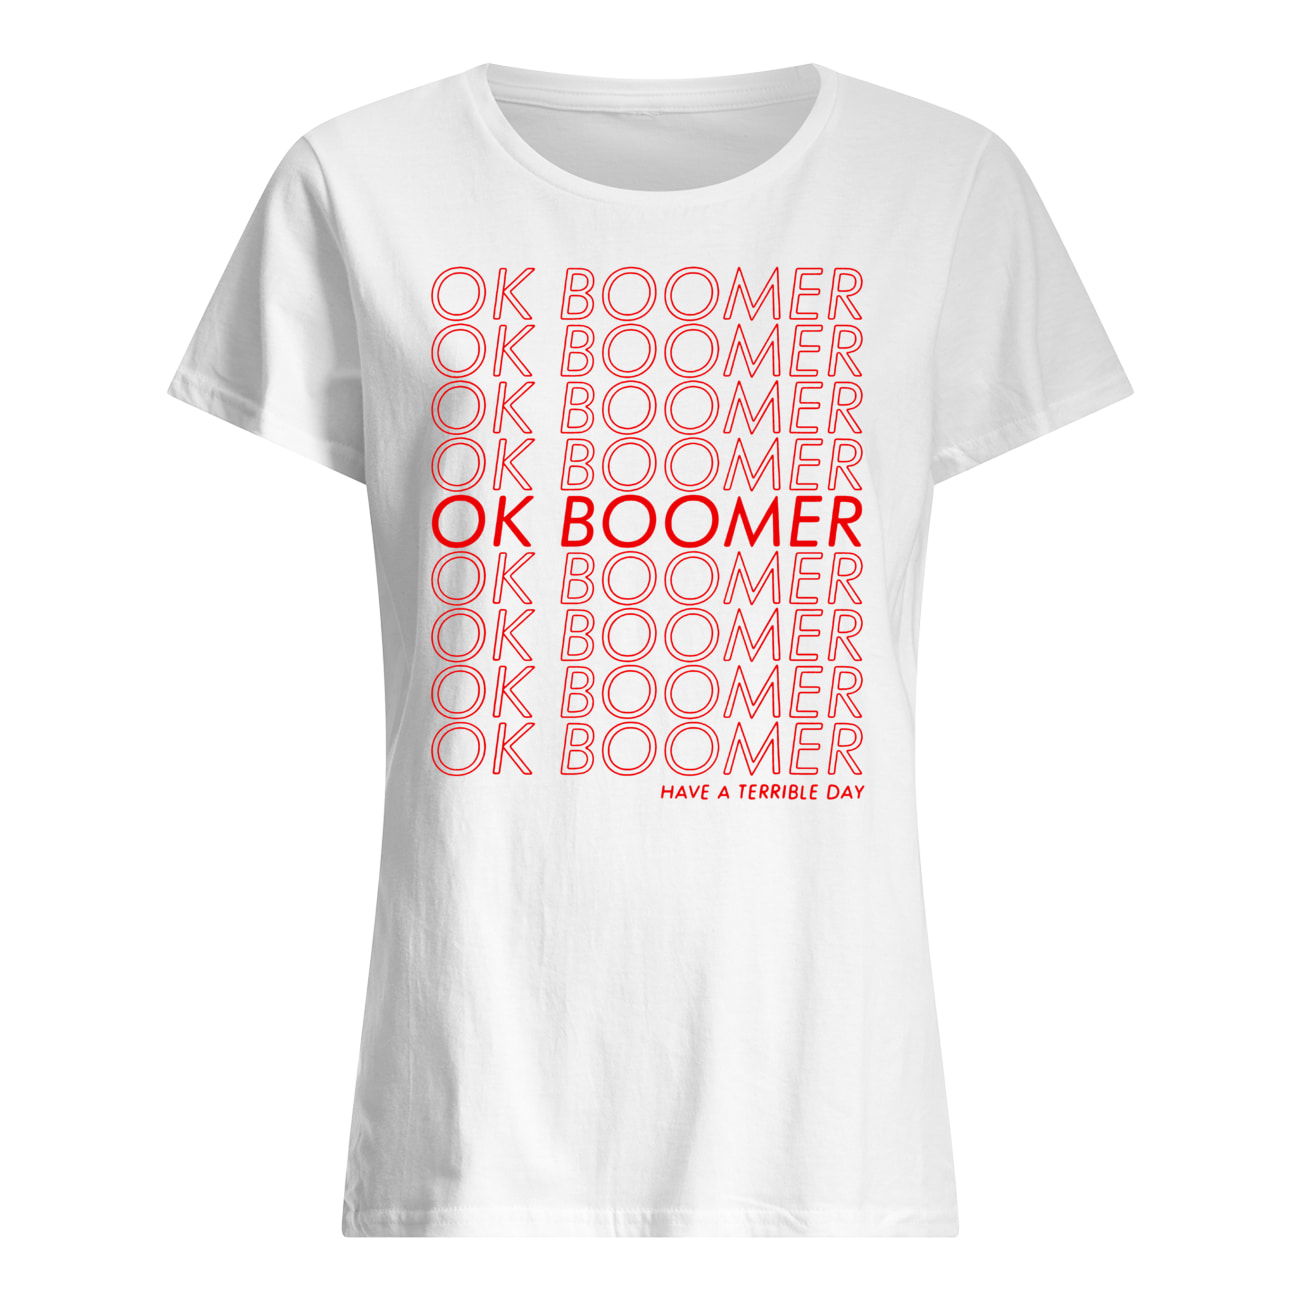 Ok boomer have a terrible day womens shirt